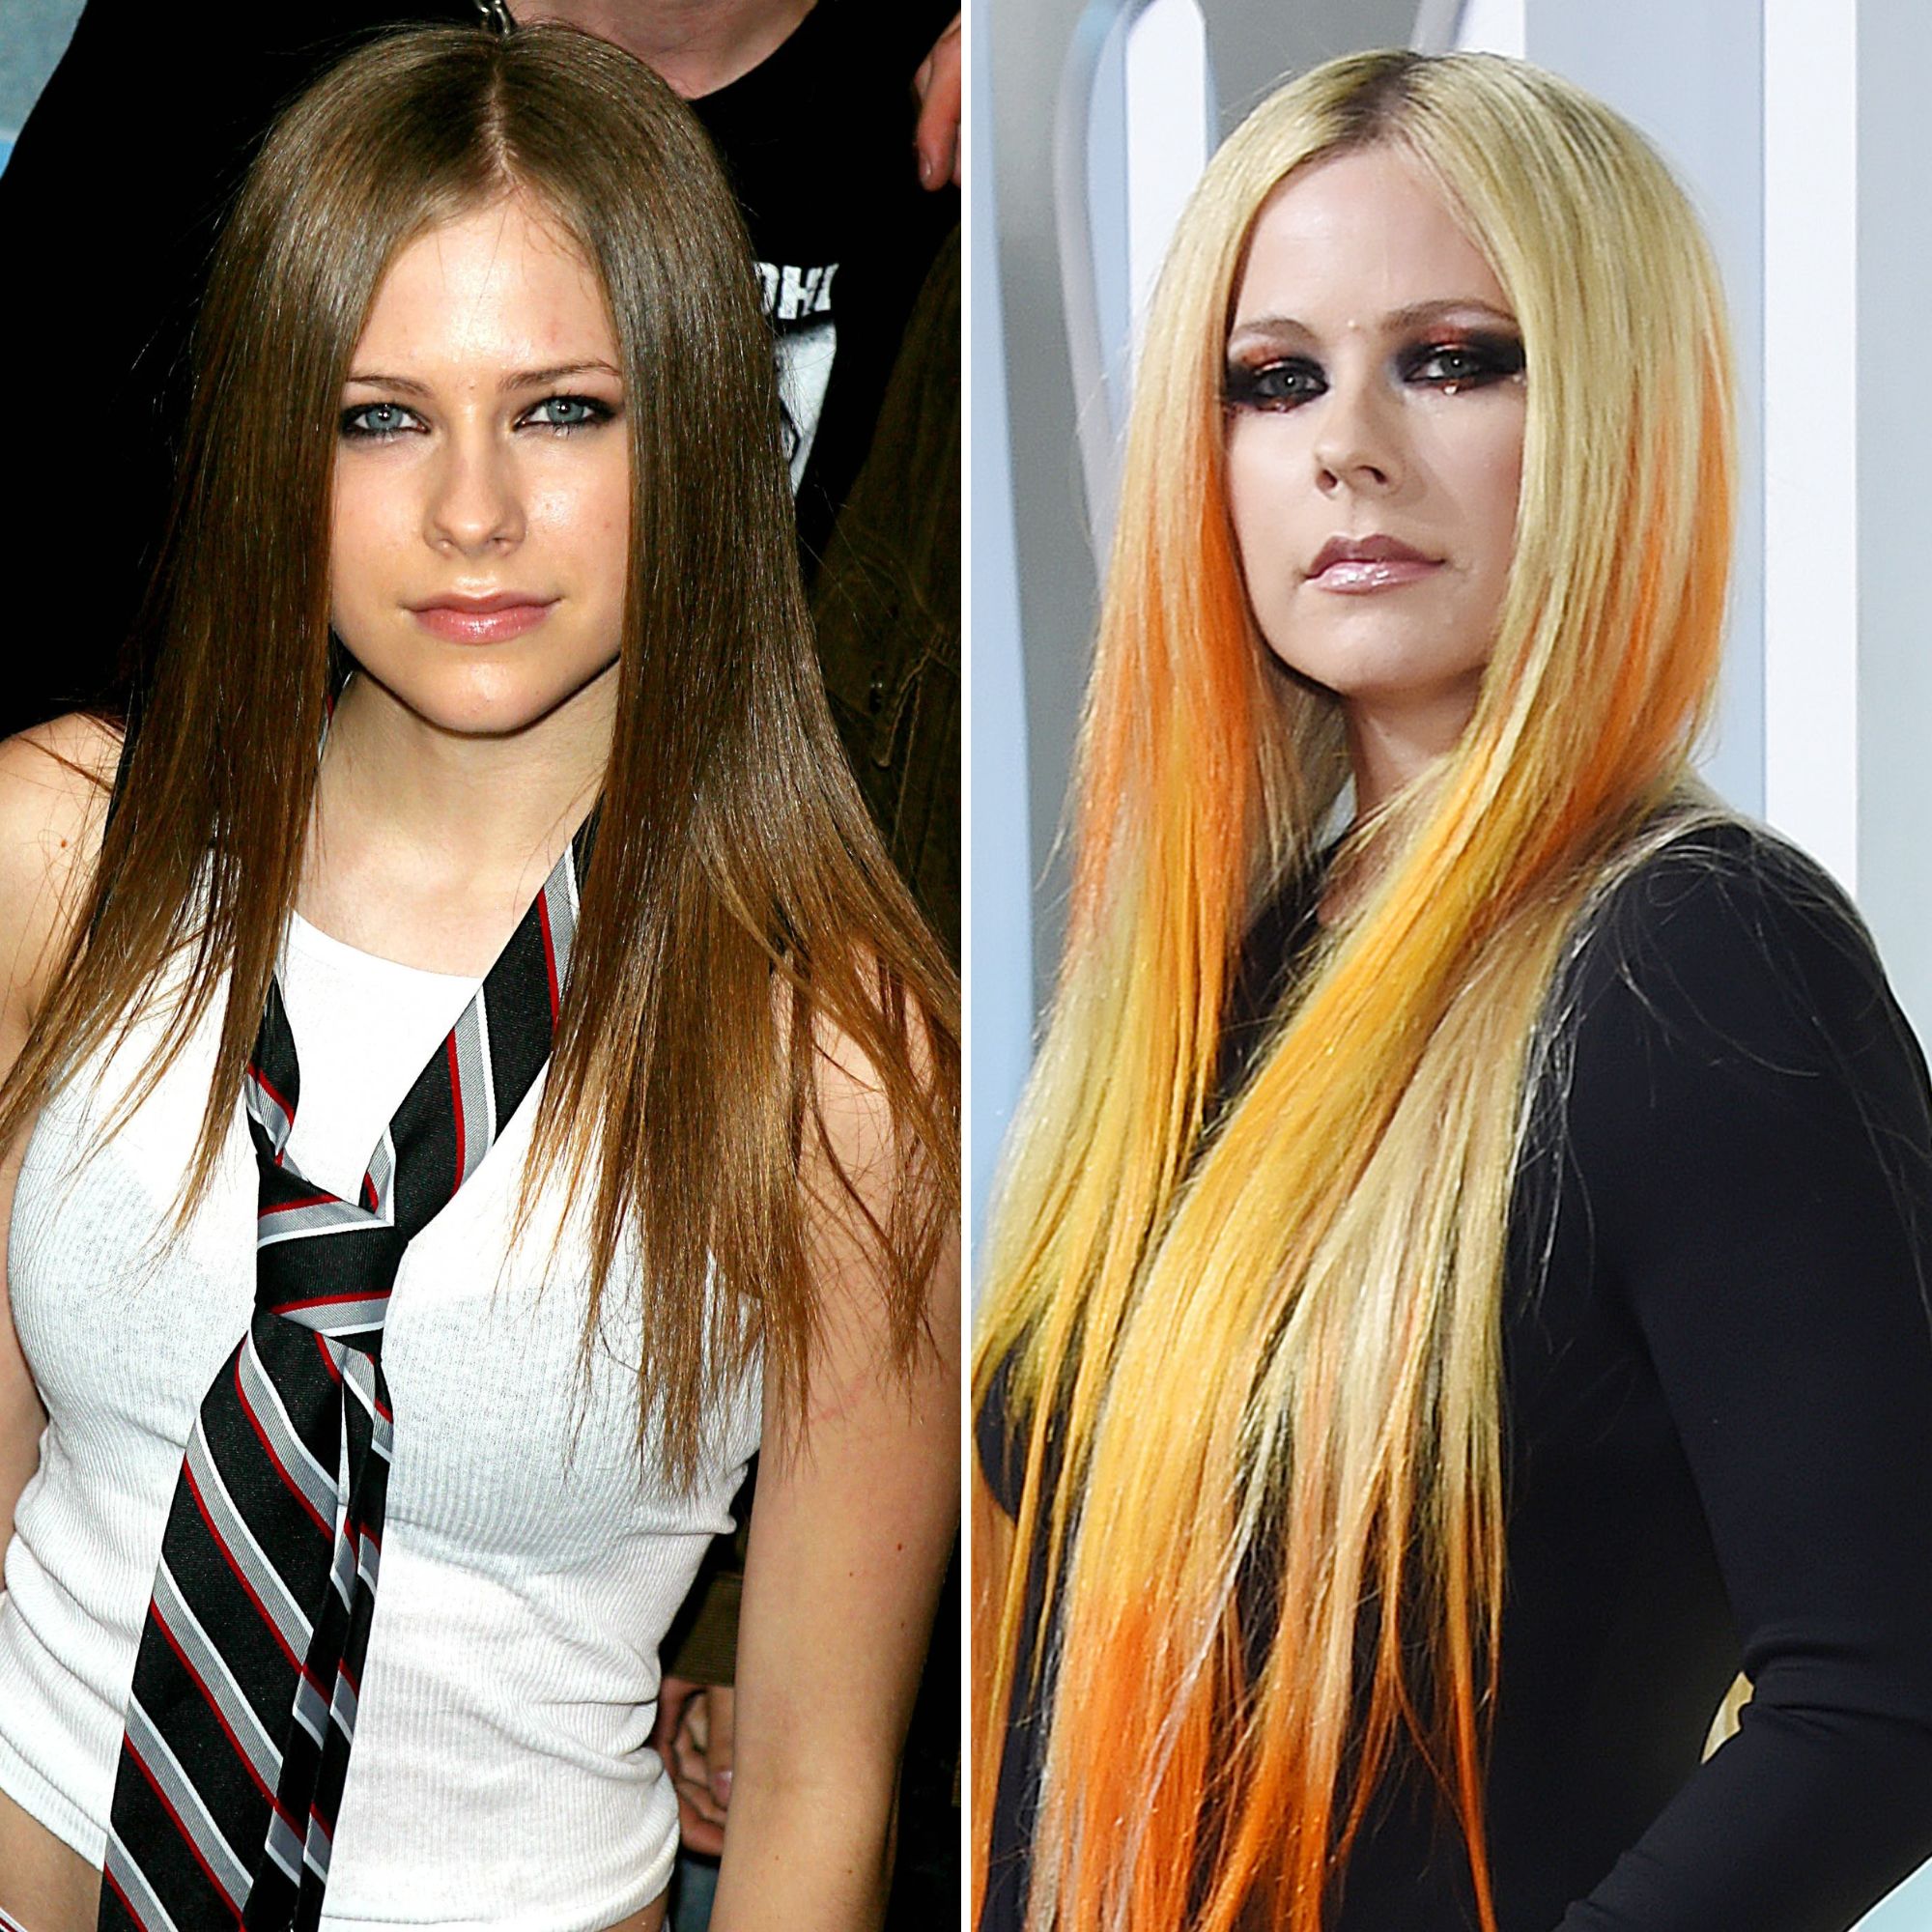 Avril Lavigne's Transformation From 2002 to Today Photos